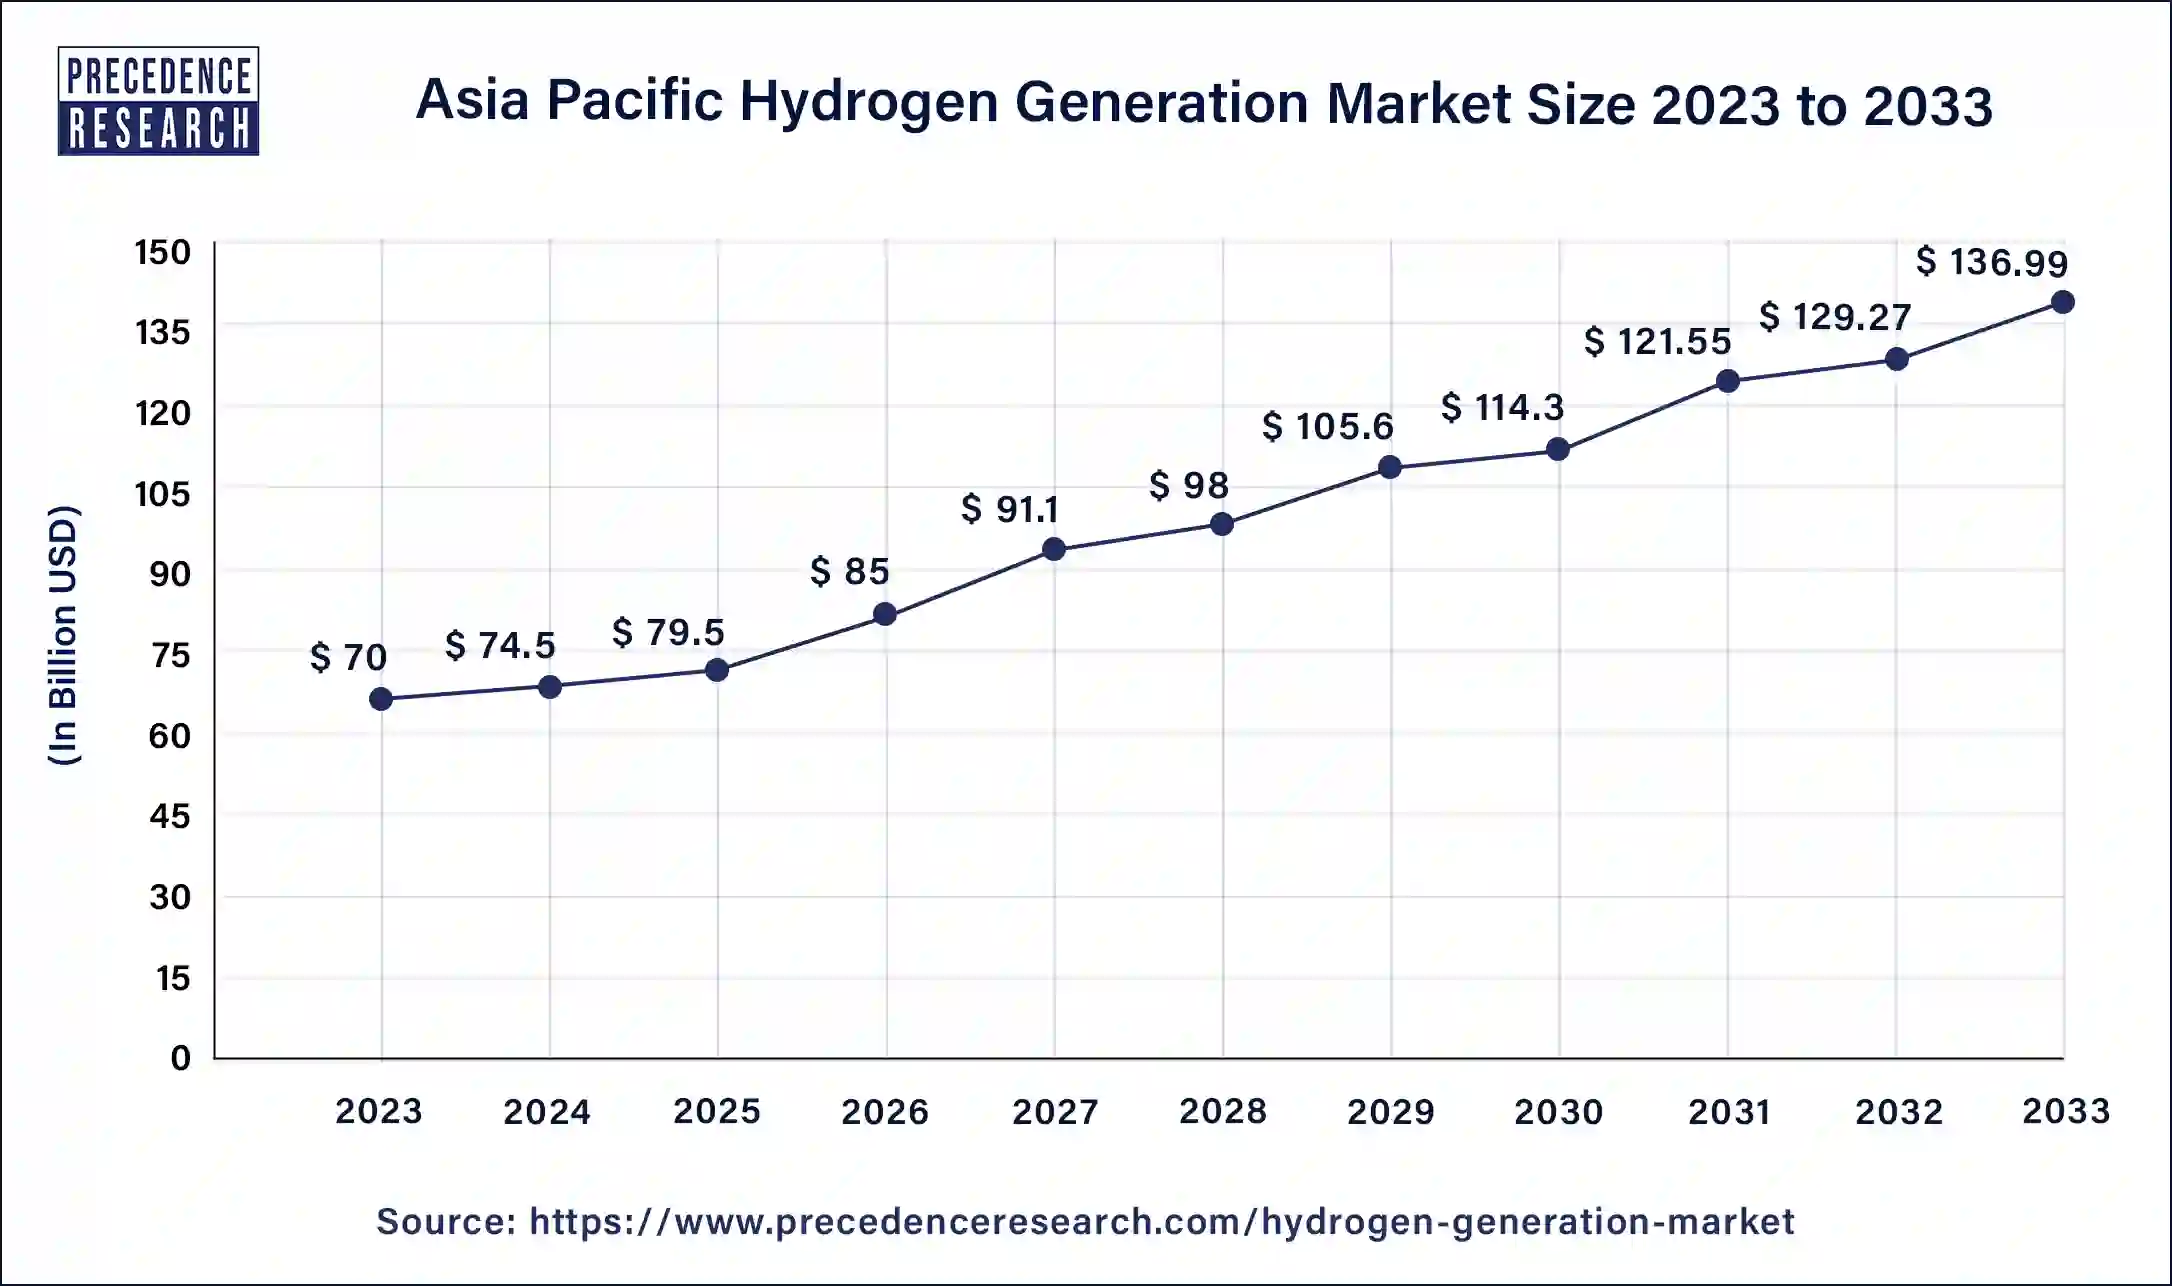 Asia Pacific Hydrogen Generation Market Size 2024 to 2033